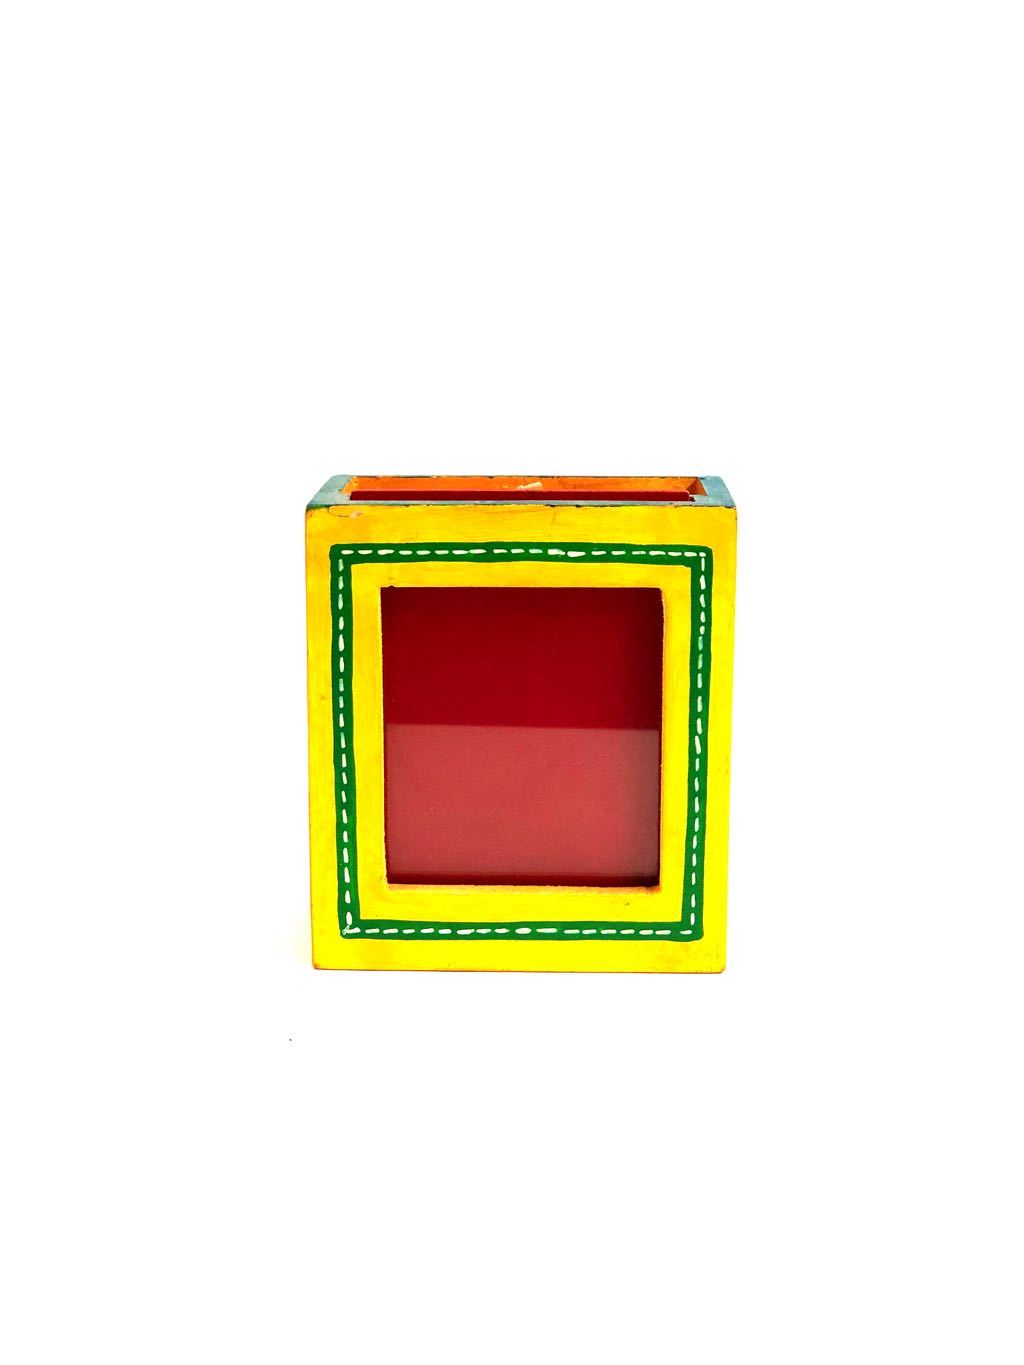 Multicolor PhotoFrame Pen Stand Hand Painted Wooden Utility Tamrapatra